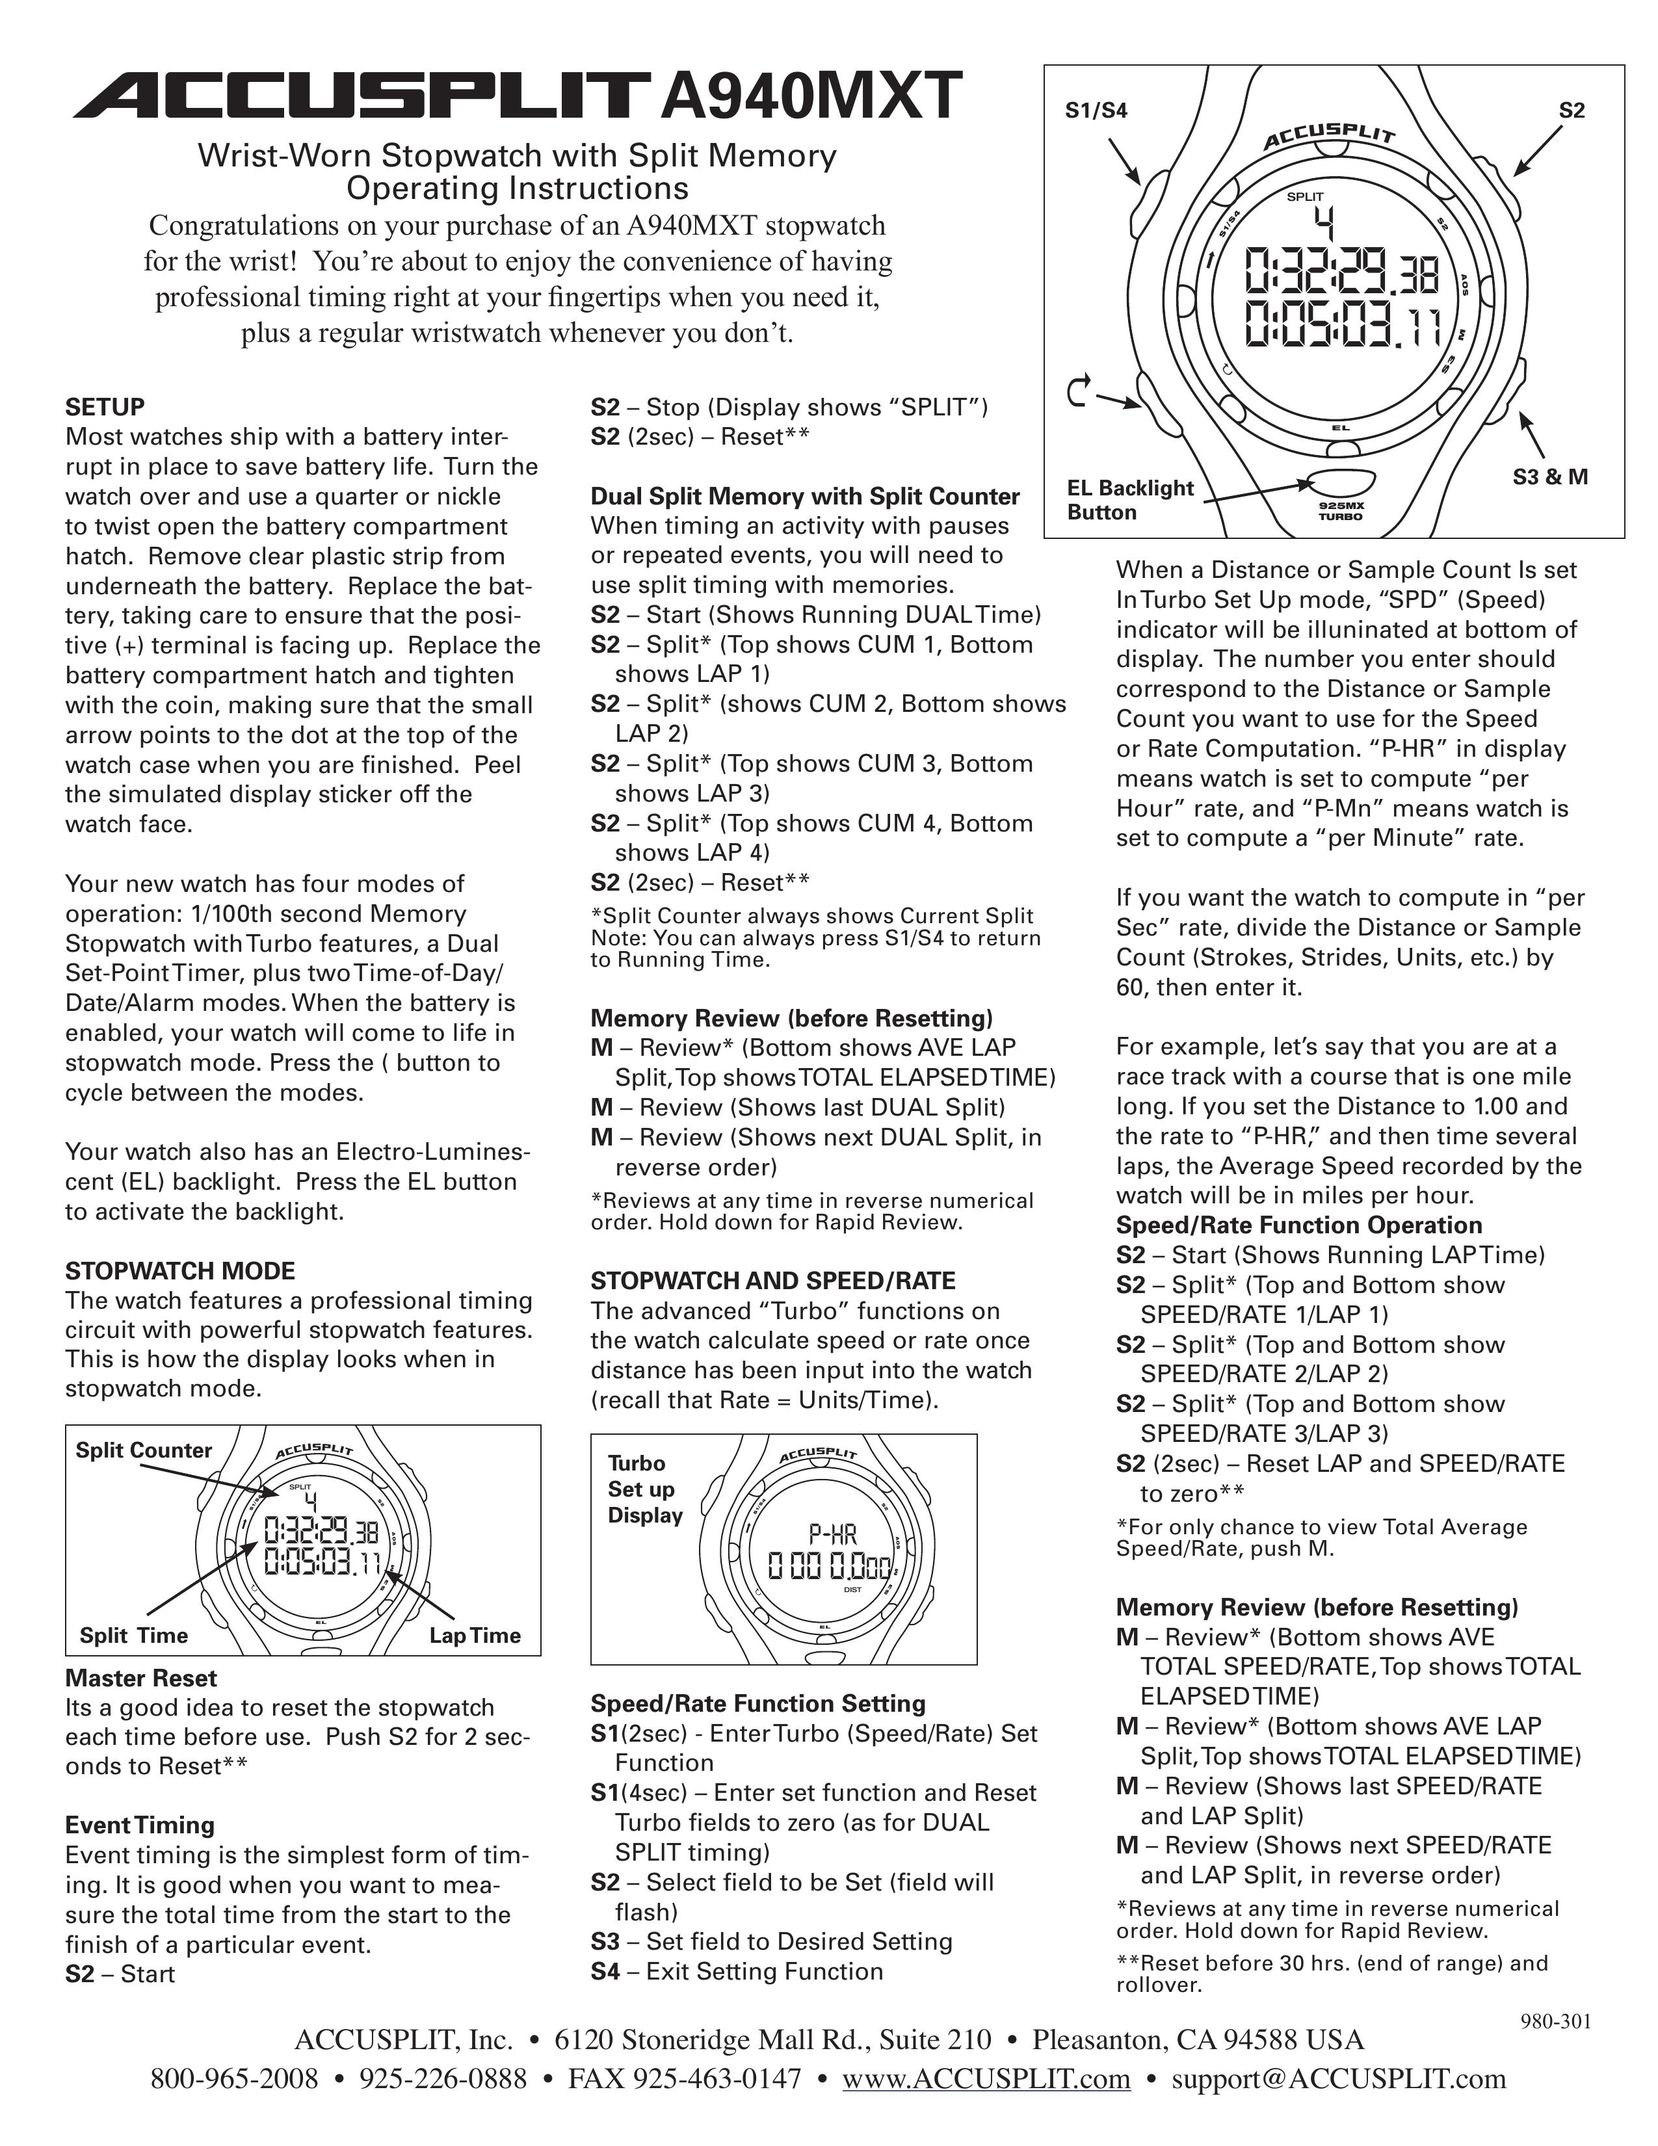 Accusplit A940MXT Watch User Manual